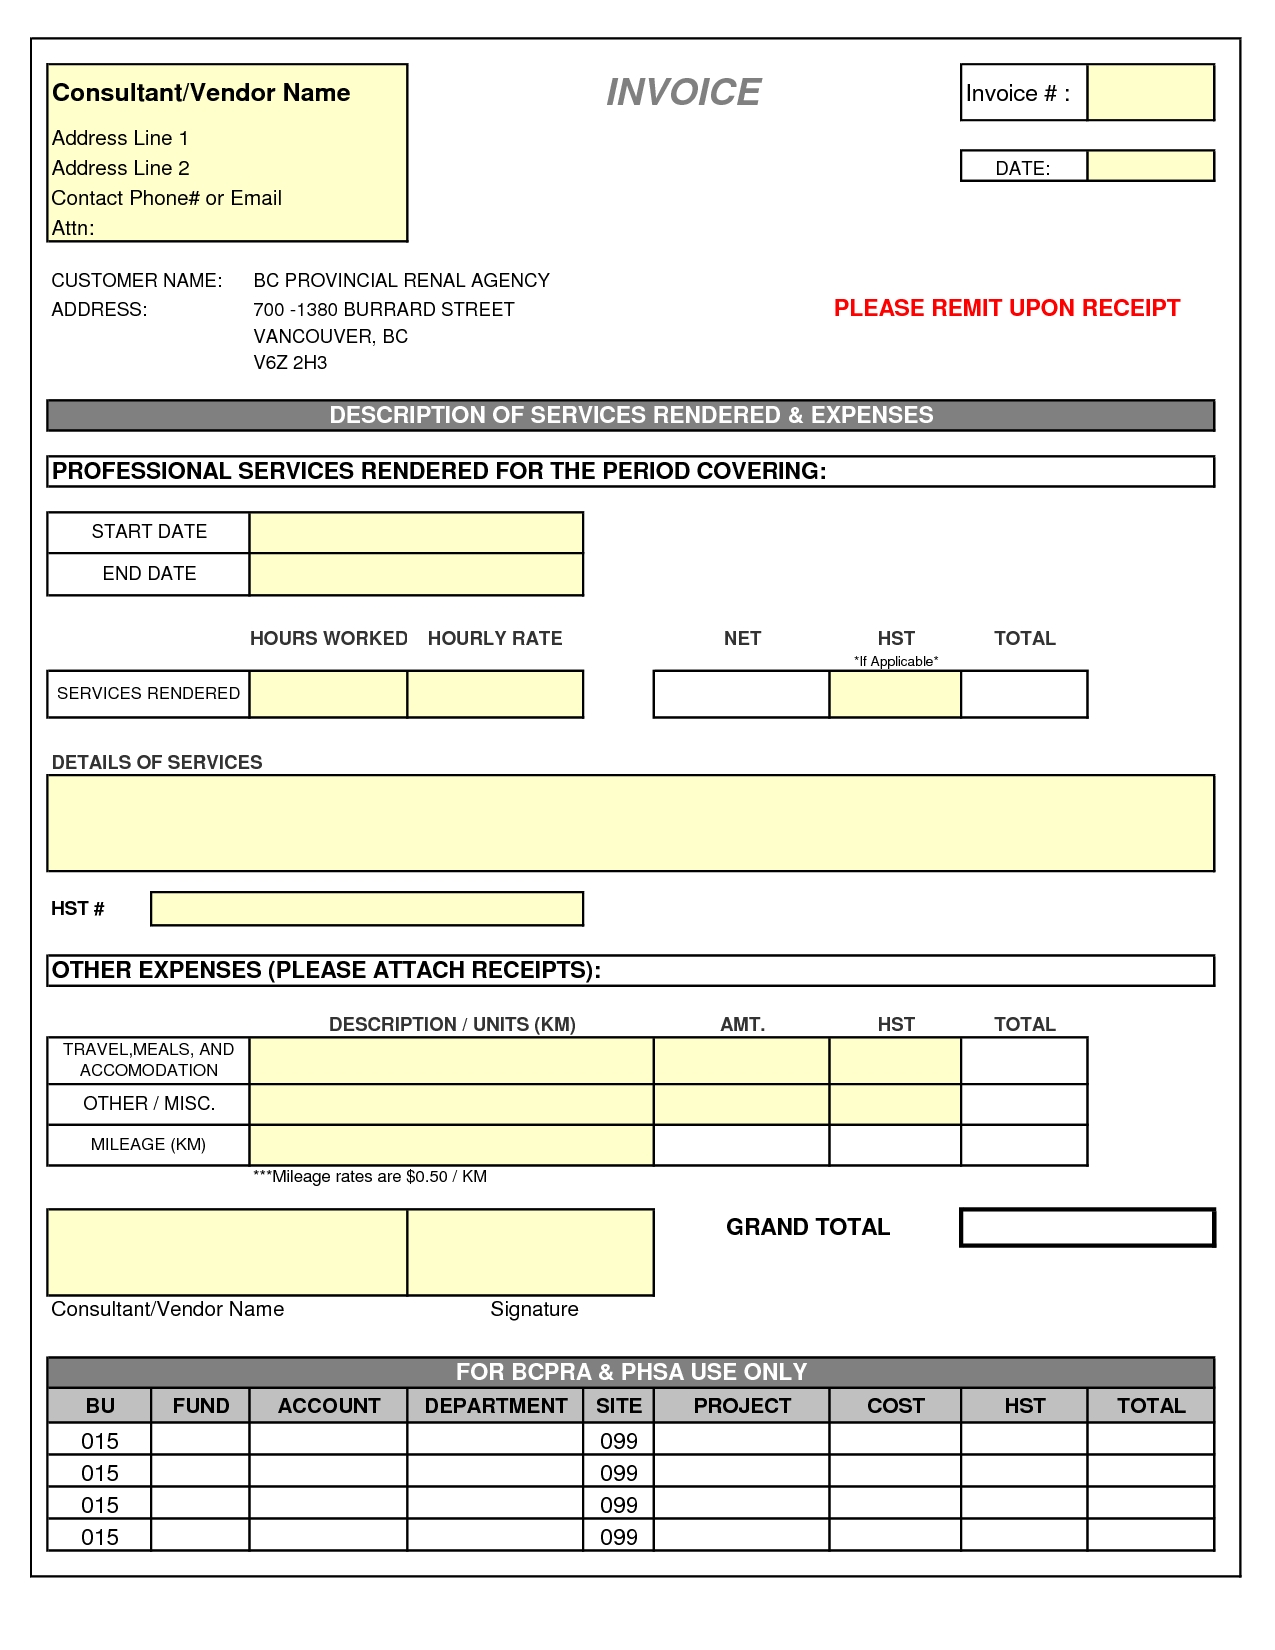 sample consultant invoicewwwmahtaweb wwwmahtaweb invoice template for consulting services